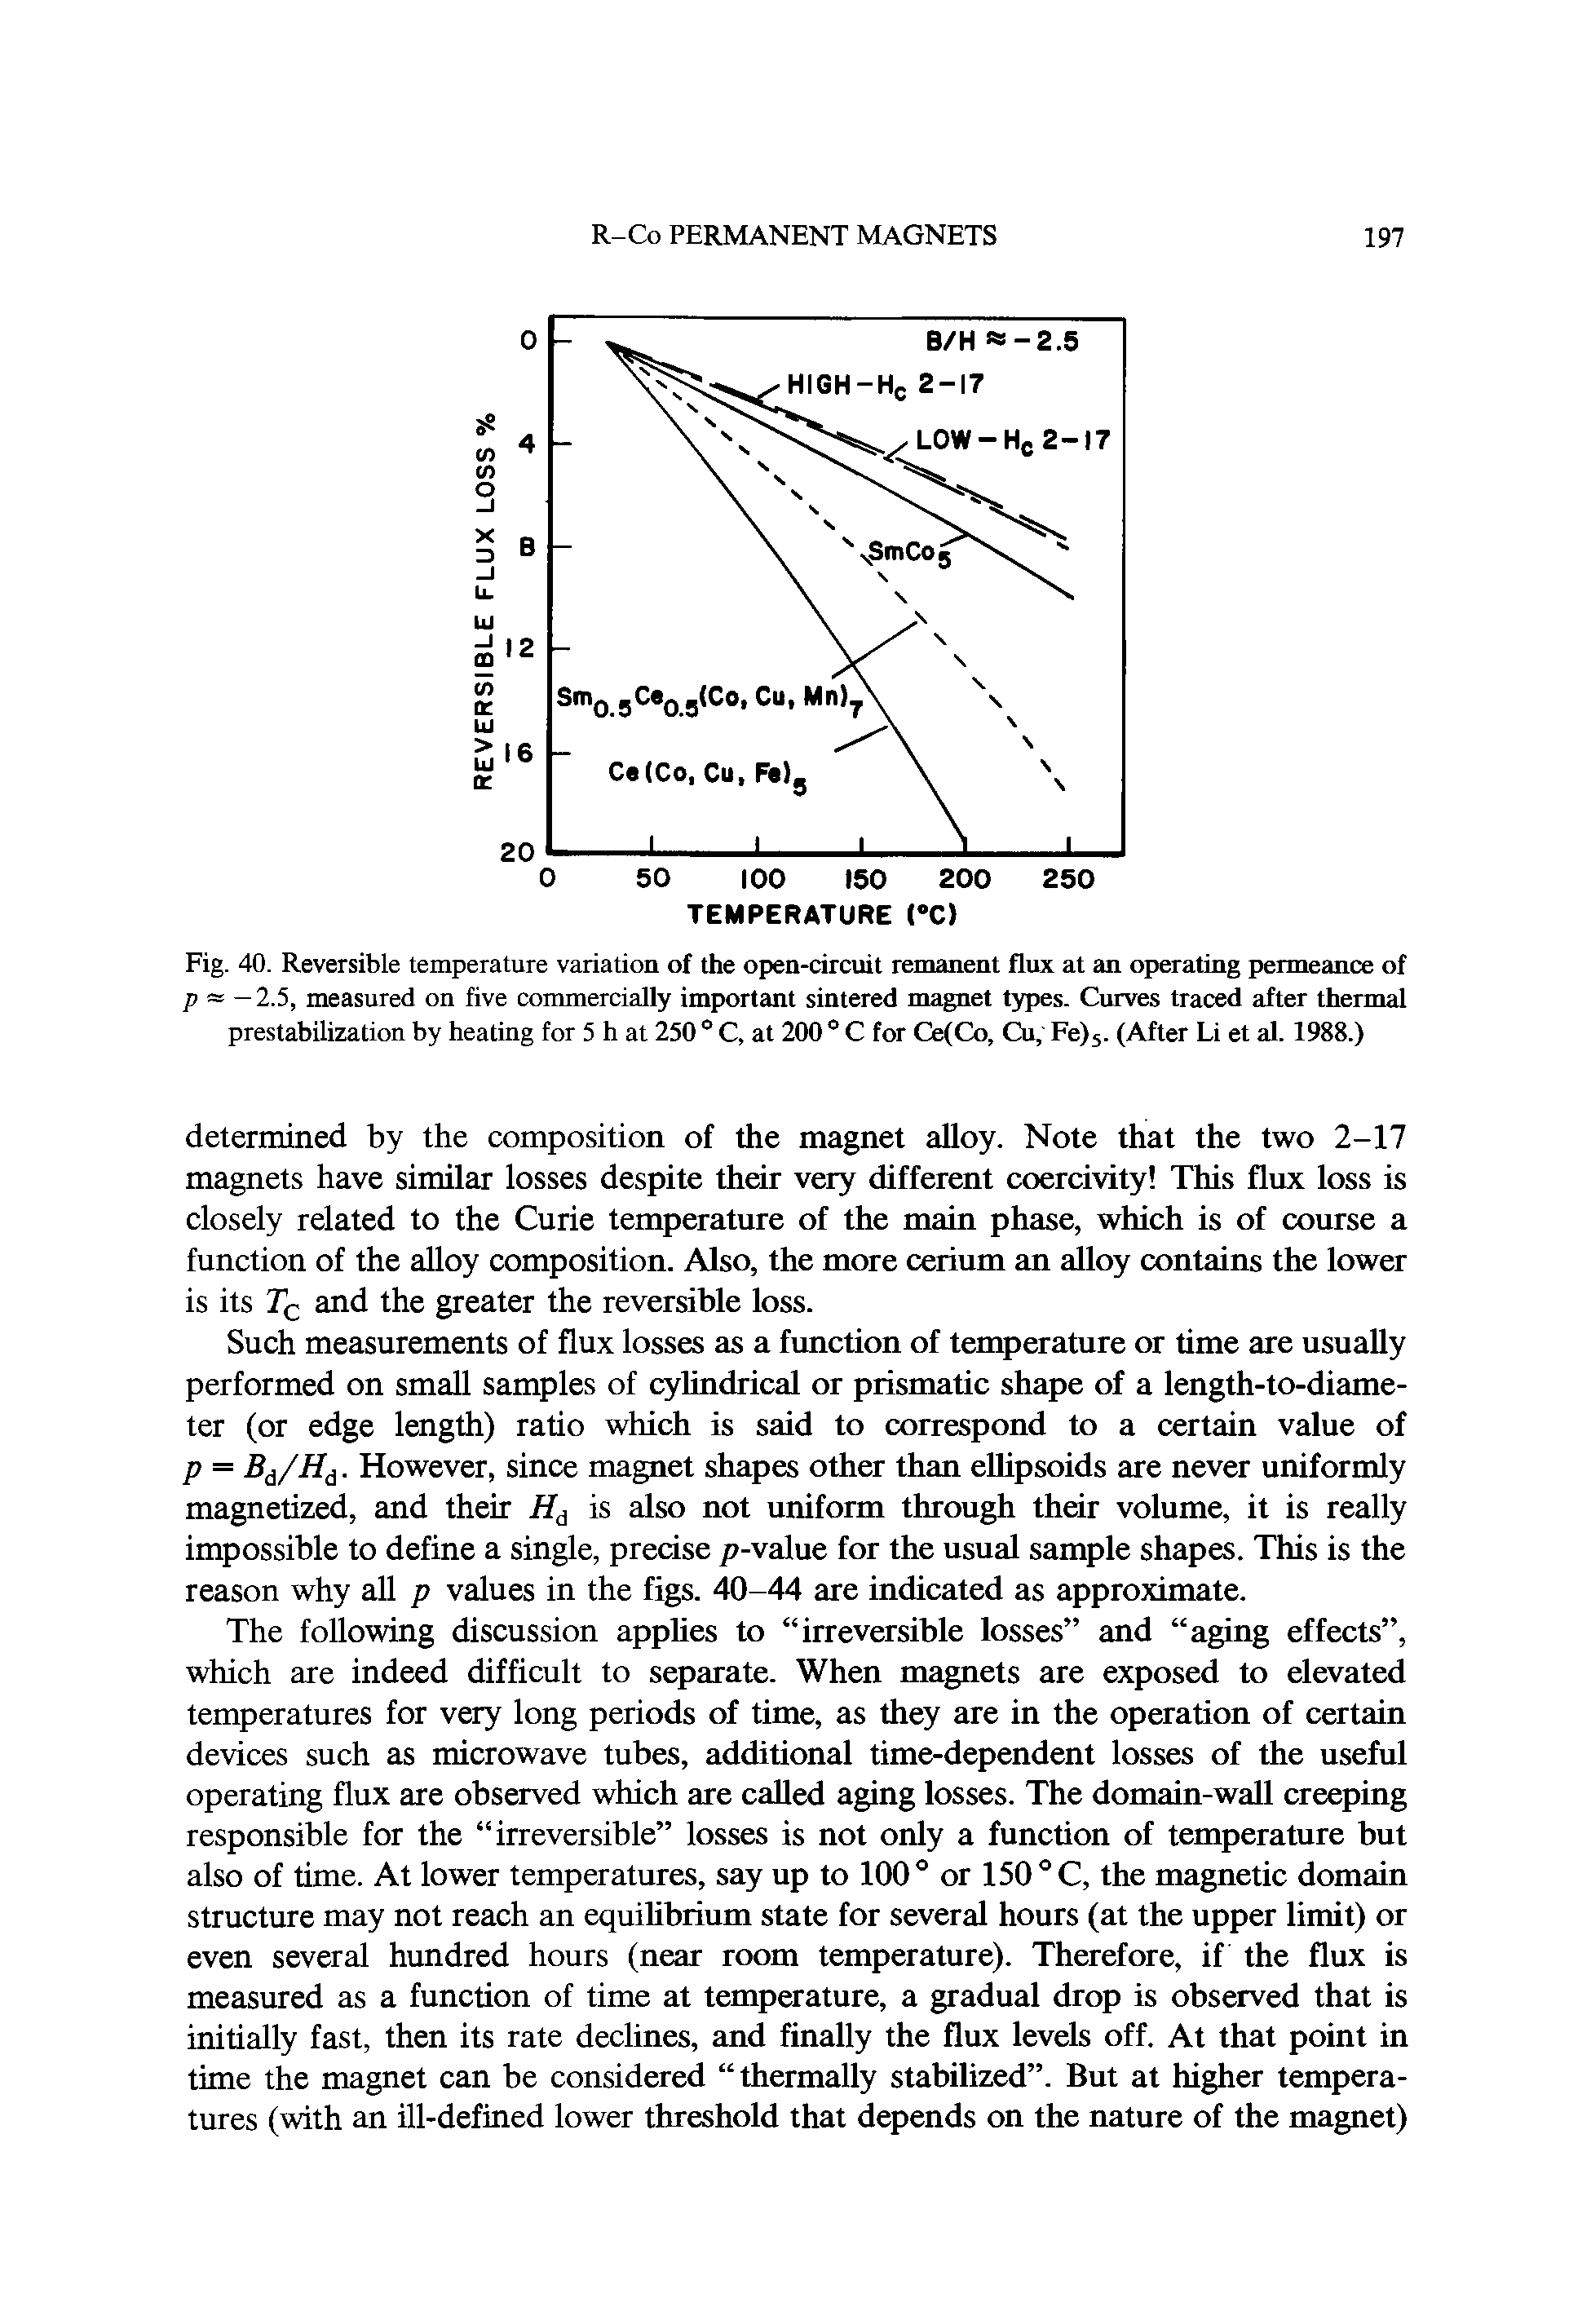 Fig. 40. Reversible temperature variation of the open-circuit remanent flux at an operating permeance of p —2.5, measured on five commercially important sintered magnet types. Curves traced after thermal prestabilization by heating for 5 h at 250 ° C, at 200 ° C for Ce(Co, Cu, Fe)5. (After Li et al. 1988.)...